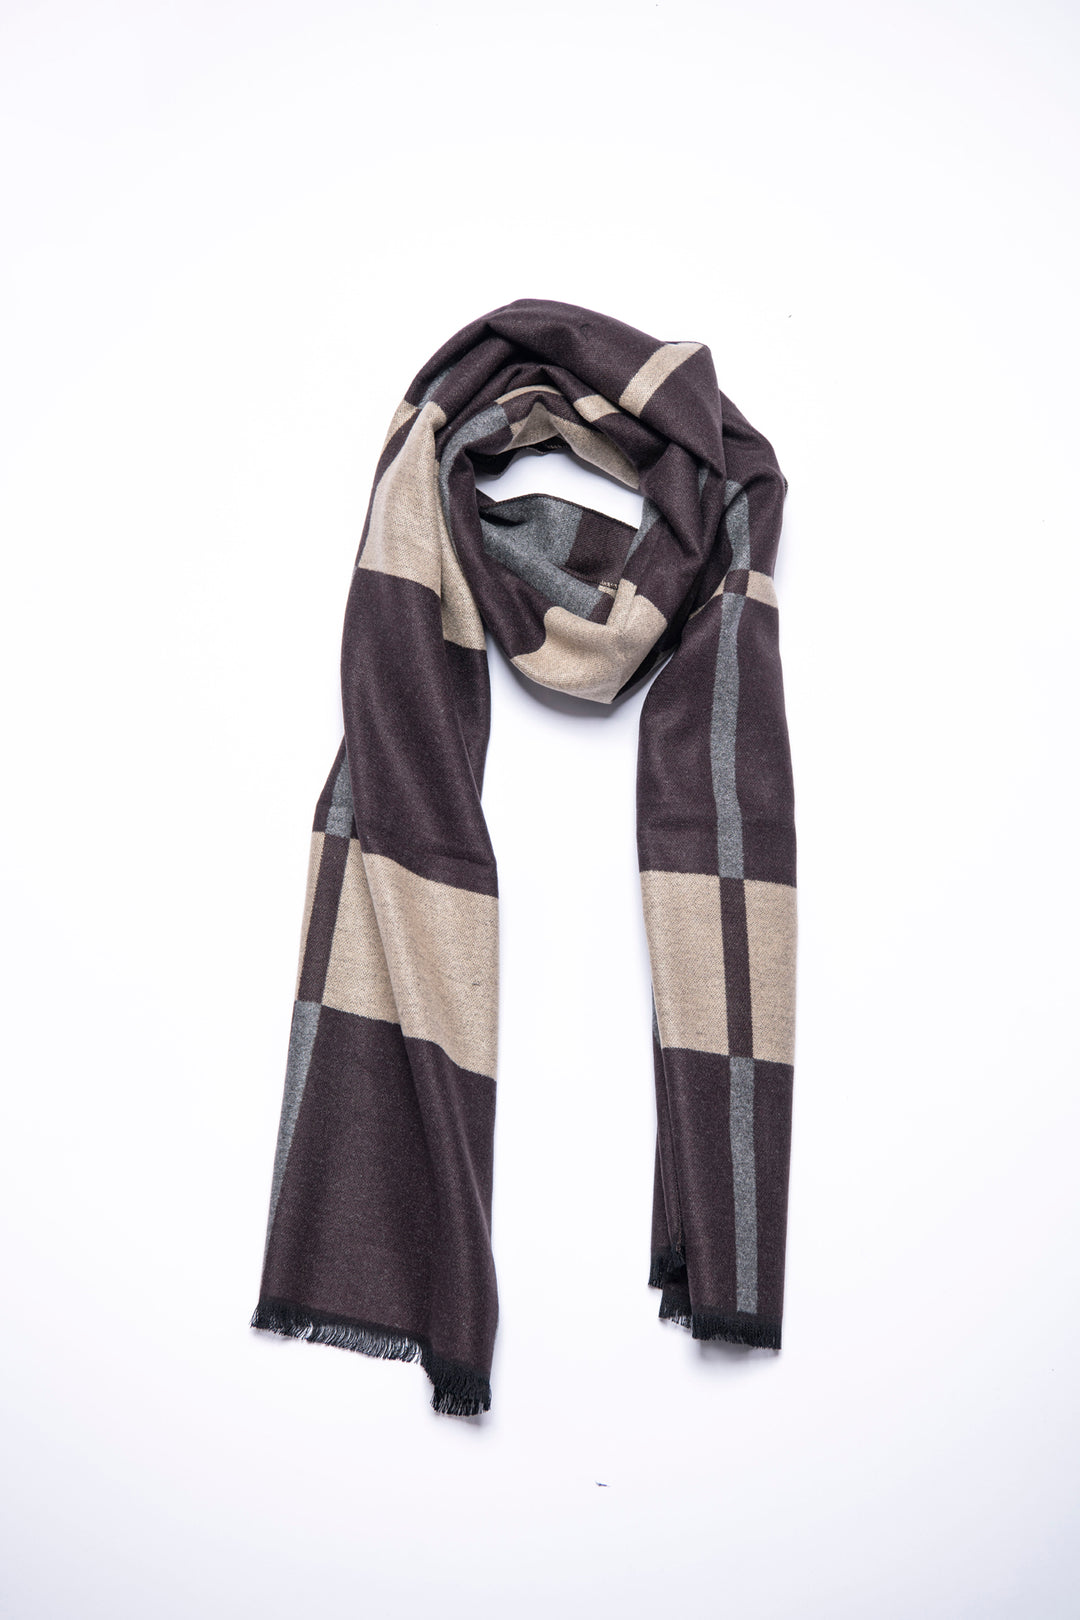 HELLORSO Scarves with Tassels